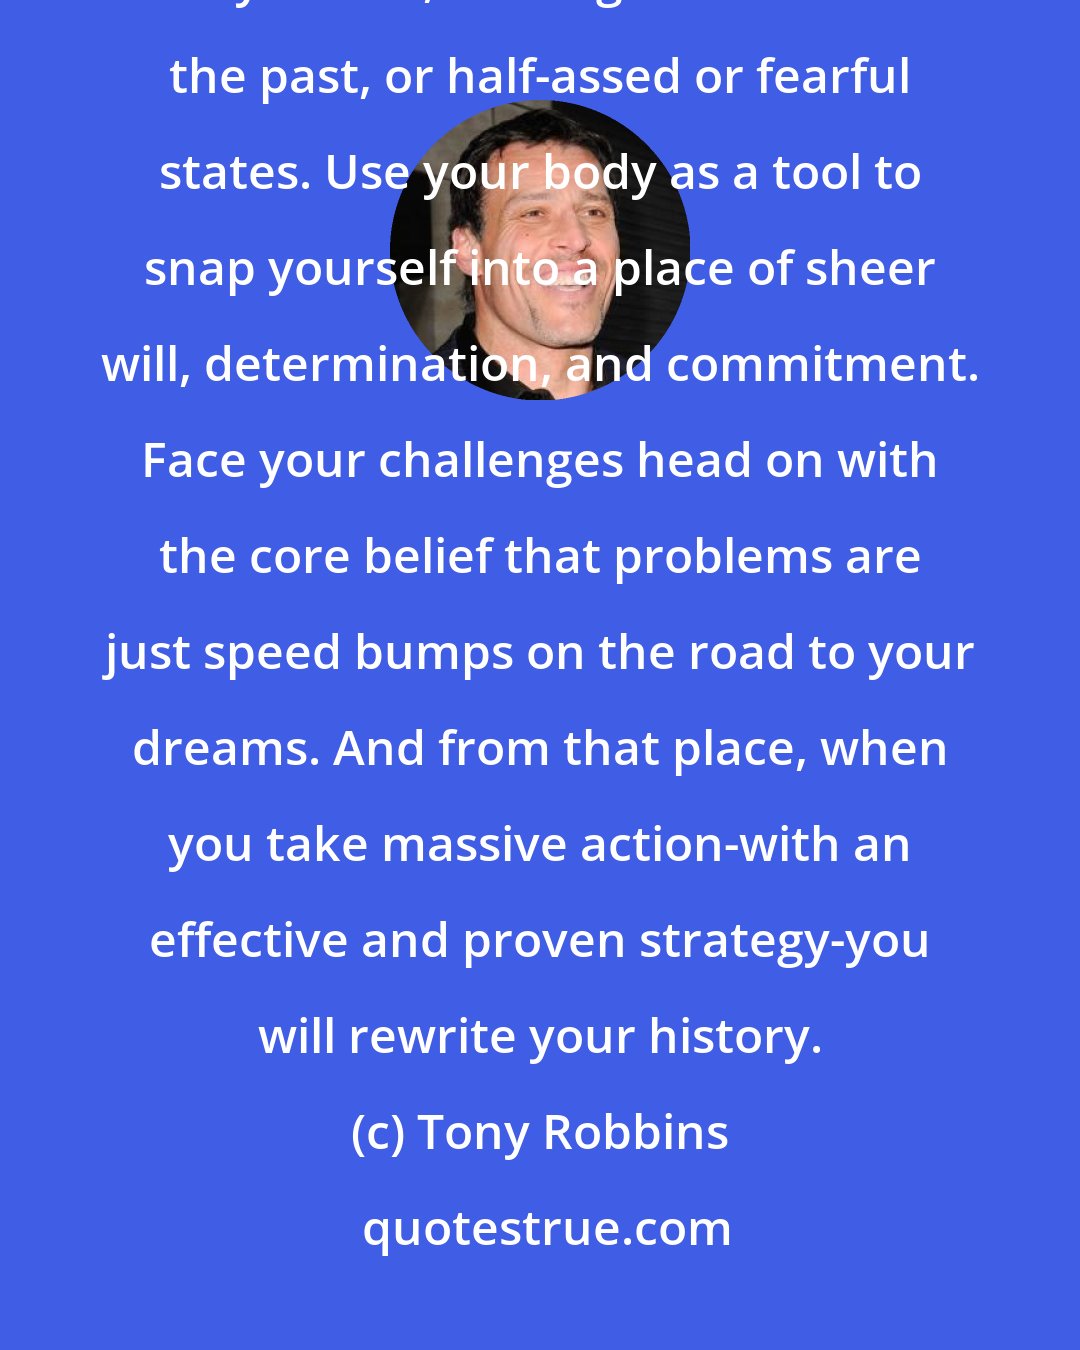 Tony Robbins: Remember: we all get what we tolerate. So stop tolerating excuses within yourself, limiting beliefs of the past, or half-assed or fearful states. Use your body as a tool to snap yourself into a place of sheer will, determination, and commitment. Face your challenges head on with the core belief that problems are just speed bumps on the road to your dreams. And from that place, when you take massive action-with an effective and proven strategy-you will rewrite your history.